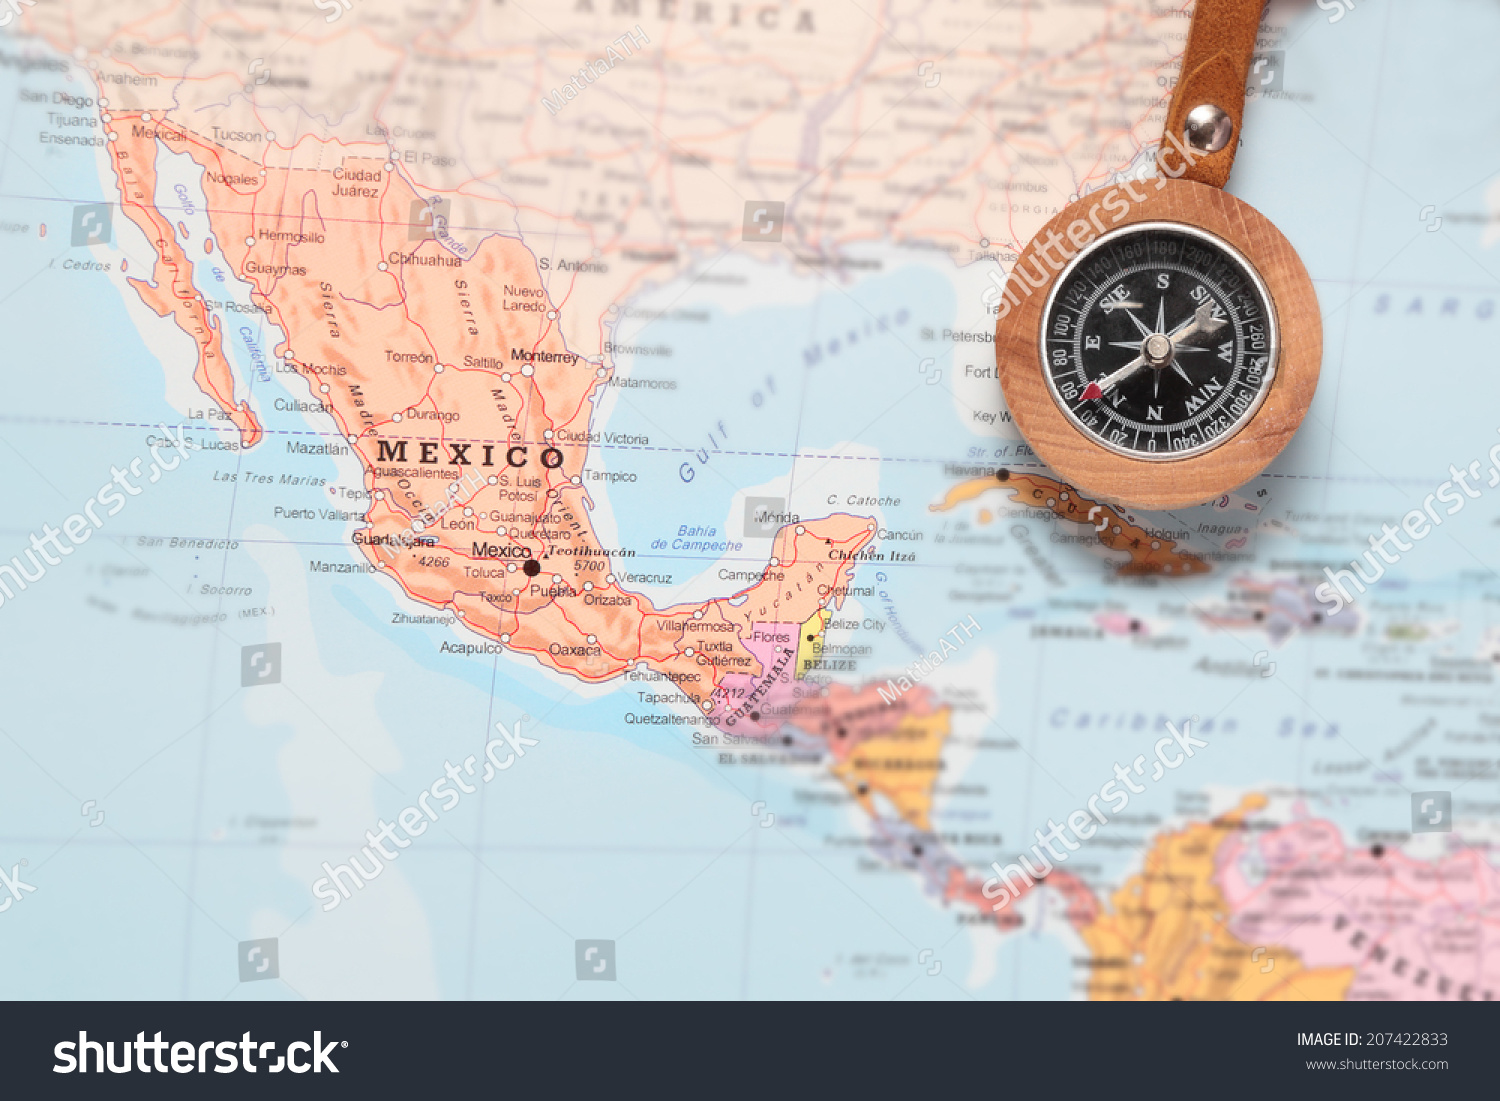 Compass on a map pointing at Mexico and planning a travel destination #207422833